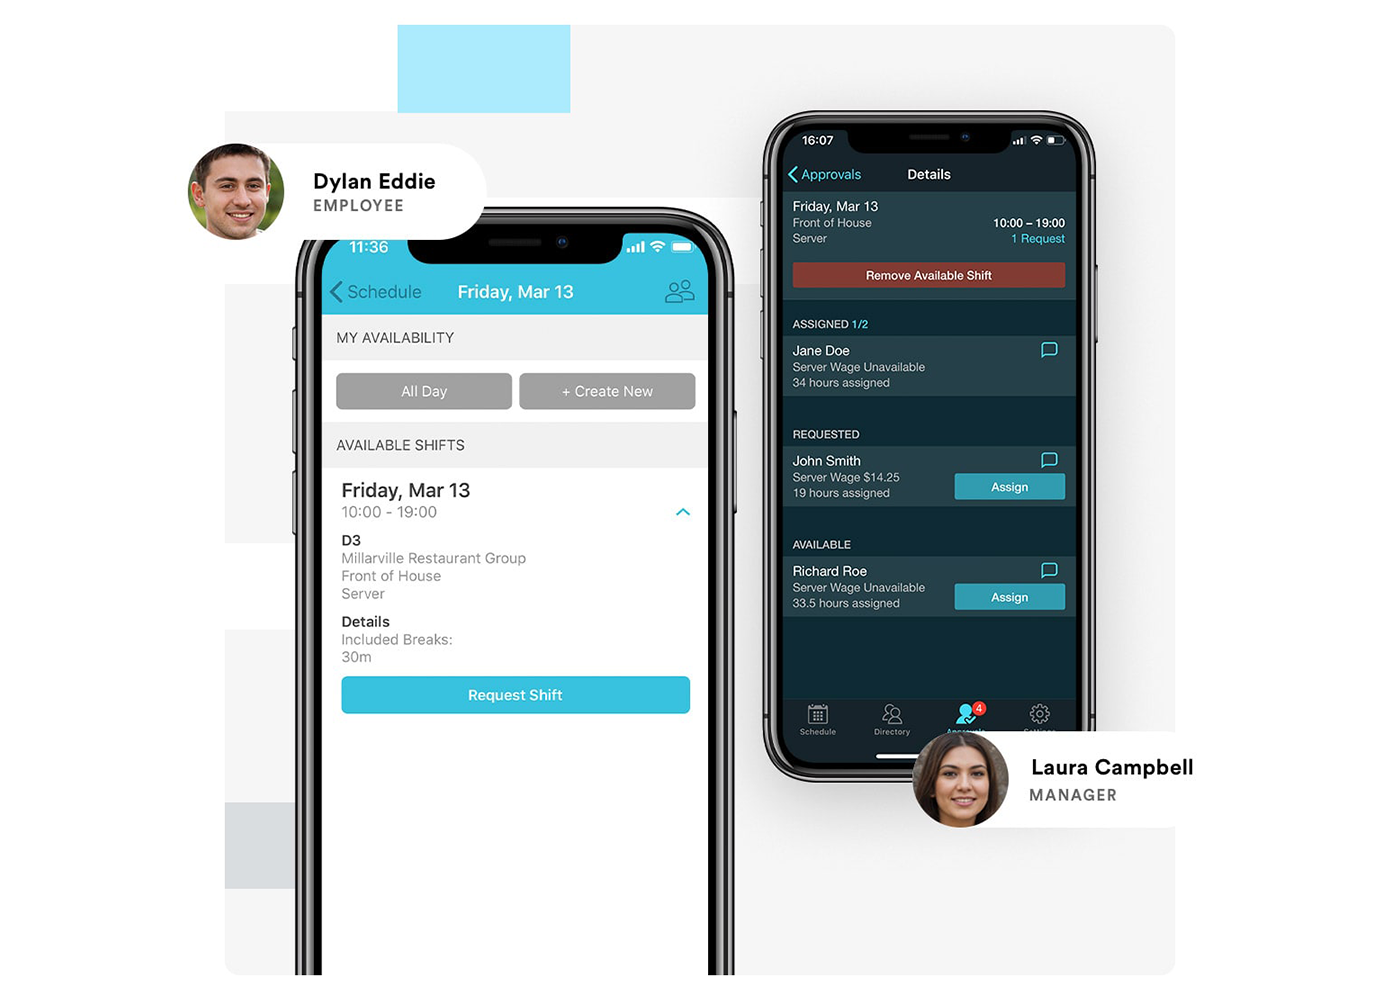 MakeShift Software - Set availability and communicate between employees and managers from your phone